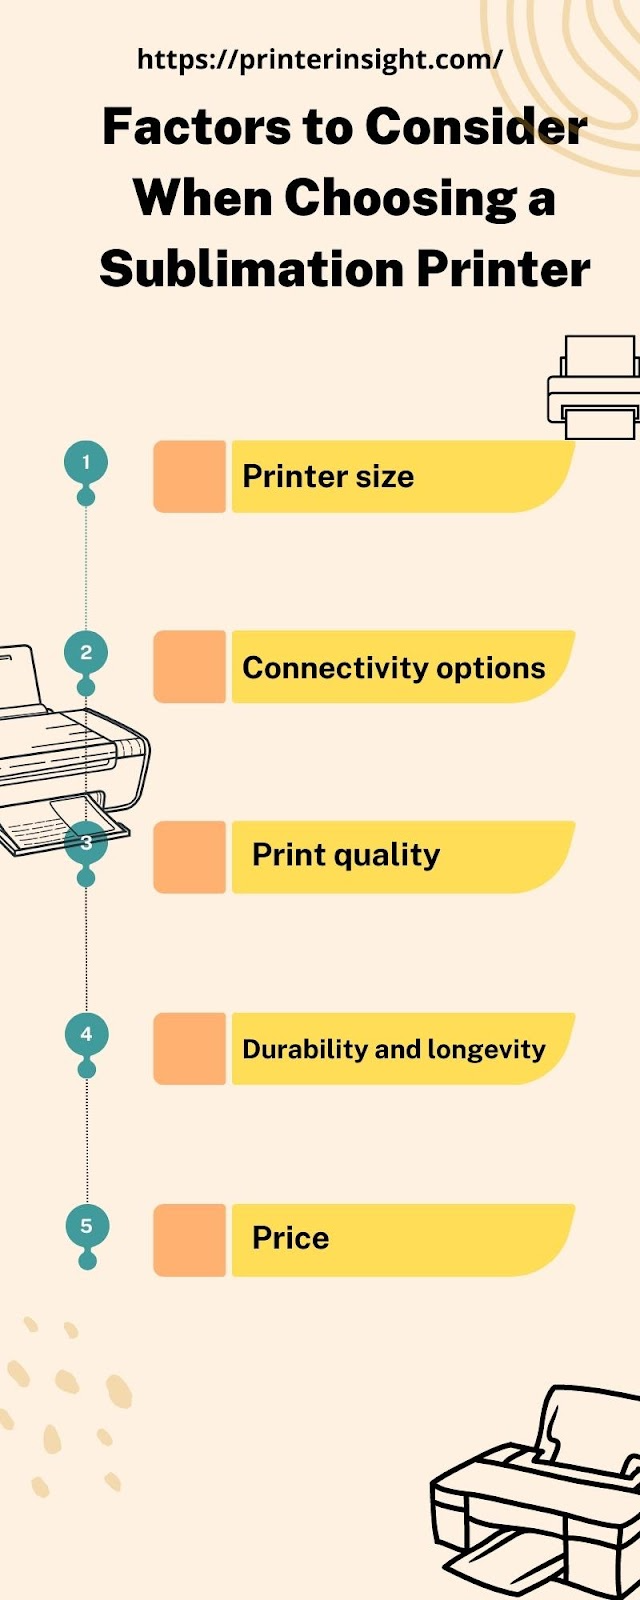 Factors to Consider When Choosing a Sublimation Printer